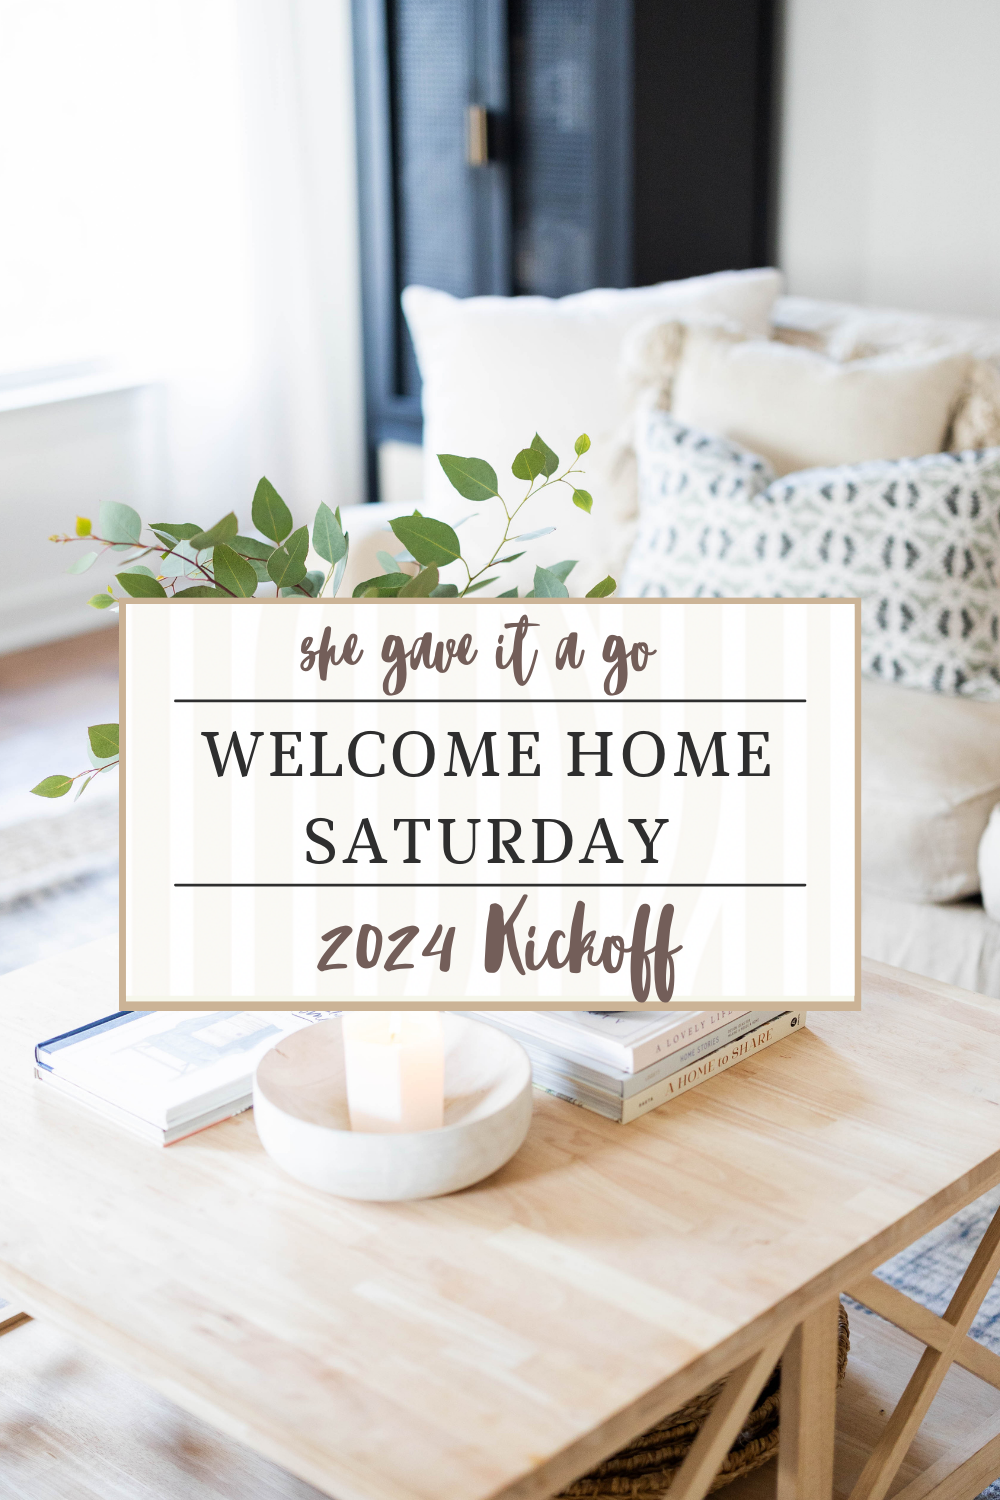 PINTEREST PIN 2024 kickoff Welcome Home Saturday